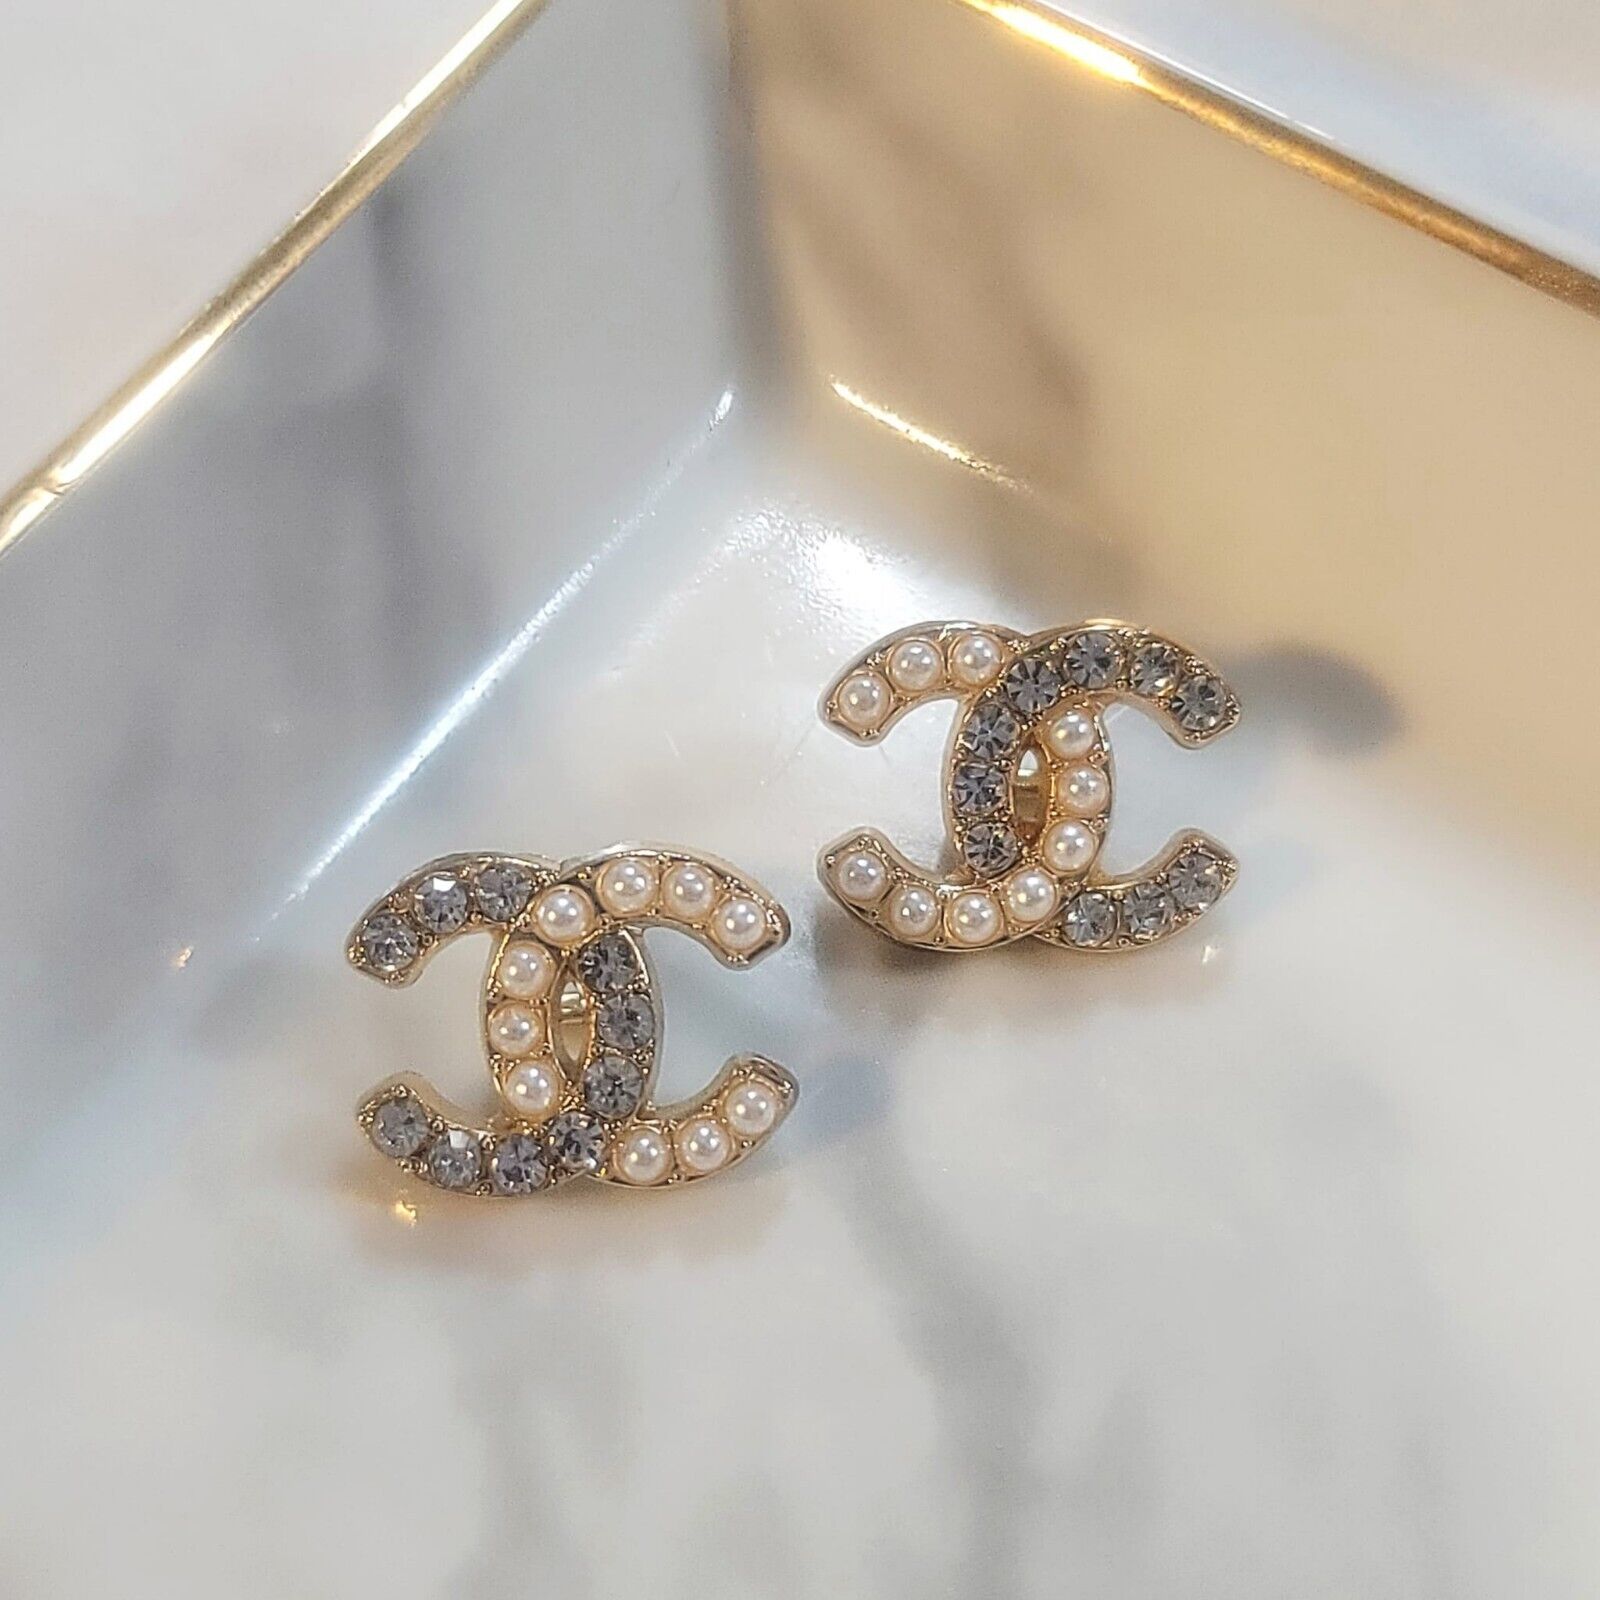 2pc Set 18x14mm Stamped Chanel Buttons Gold tone metal, small white resin...